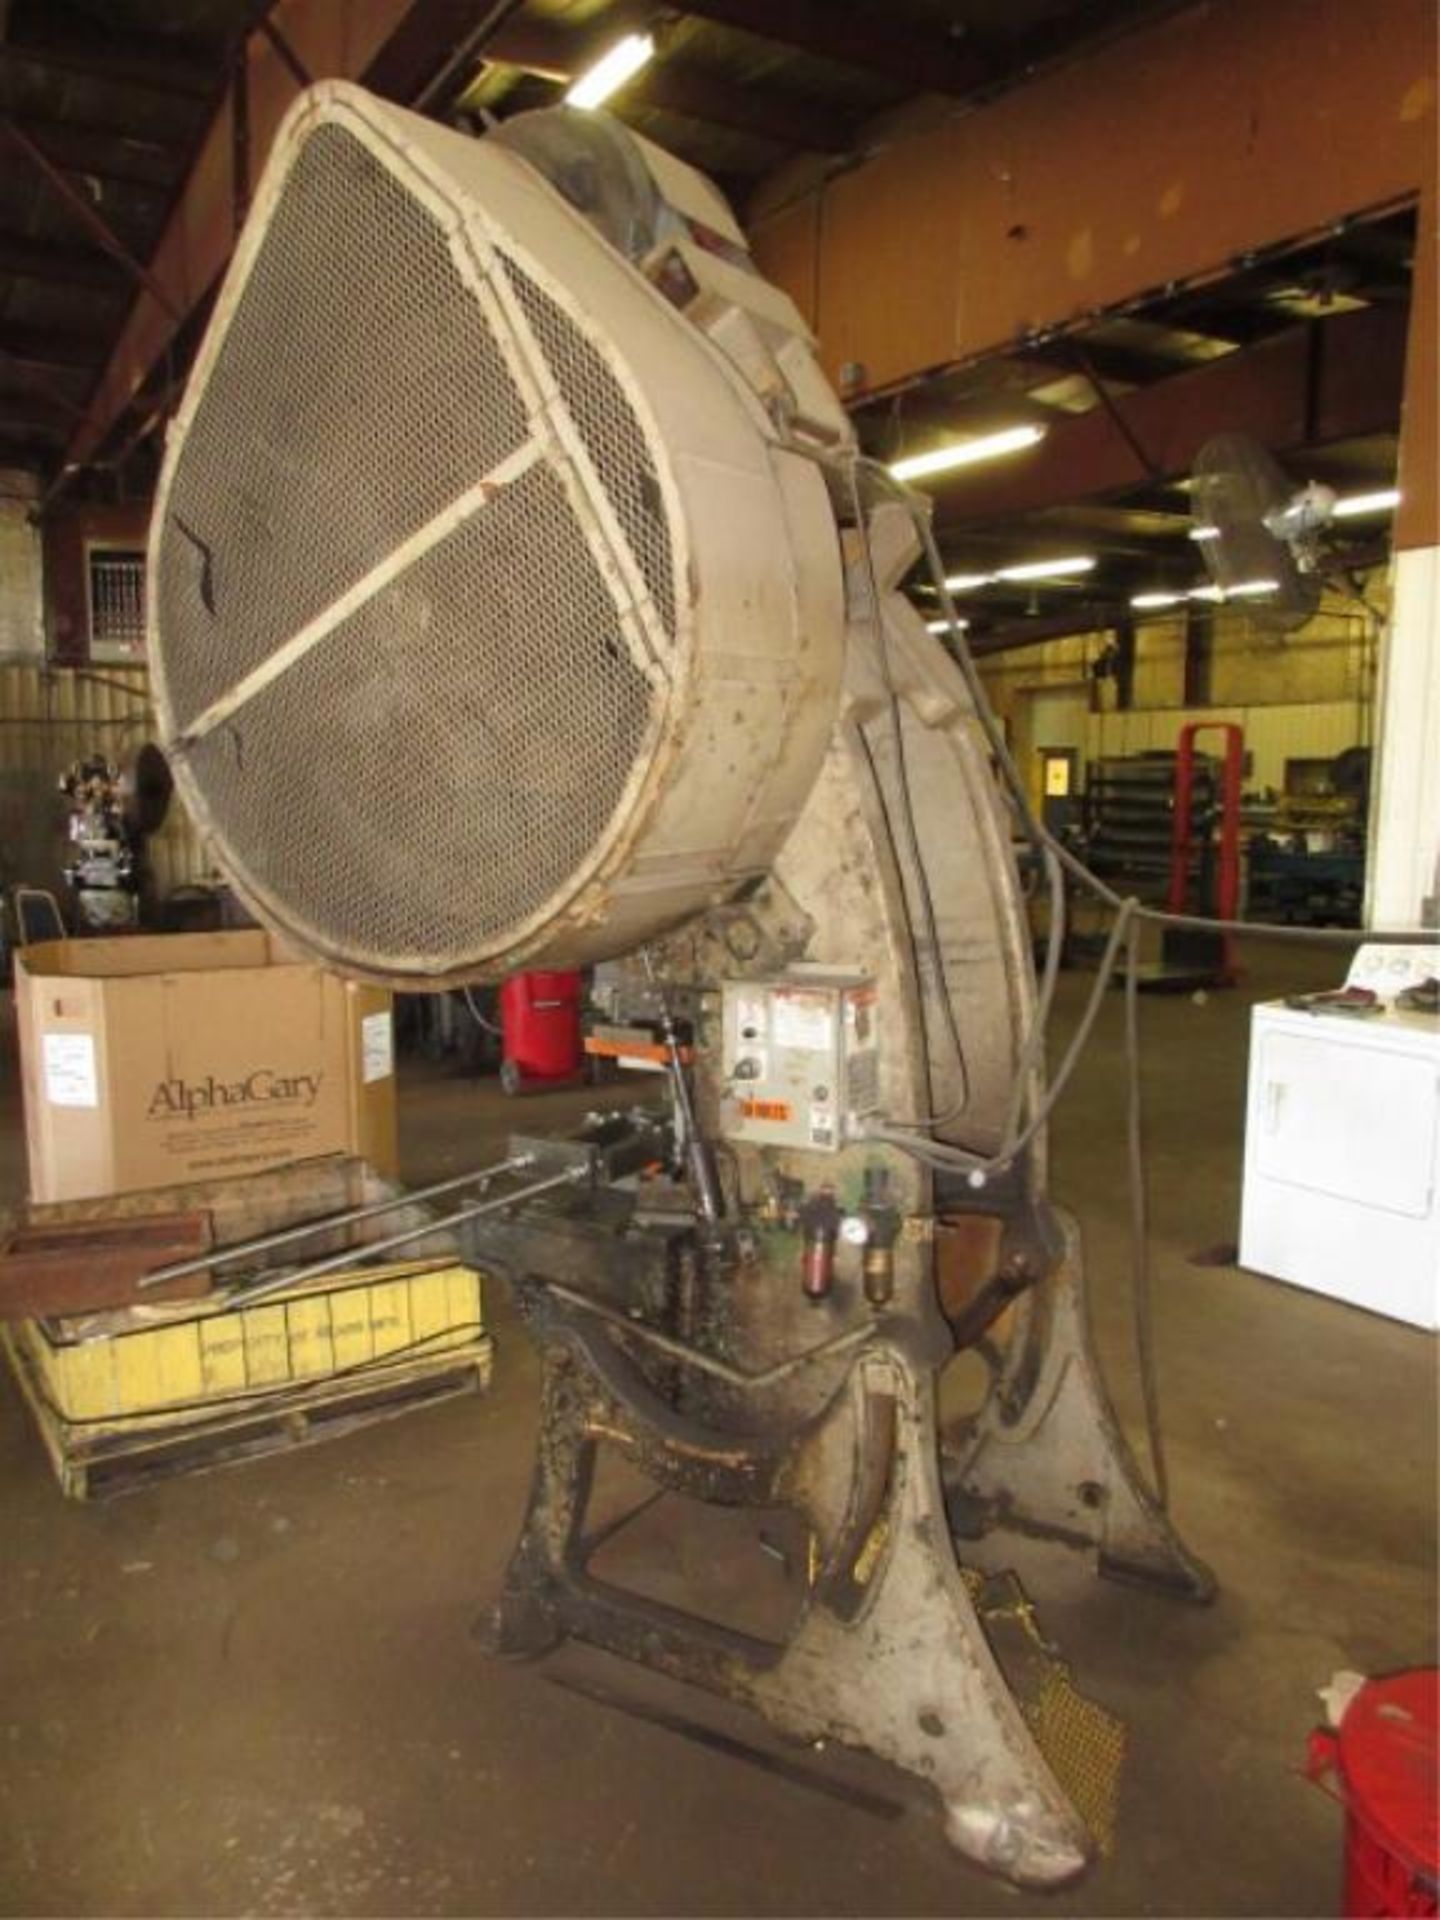 Bliss OBI Punch Press. Bliss 5.5 50-Ton OBI Punch Press, bed size 30 x 19, ground indicator, two- - Image 5 of 5